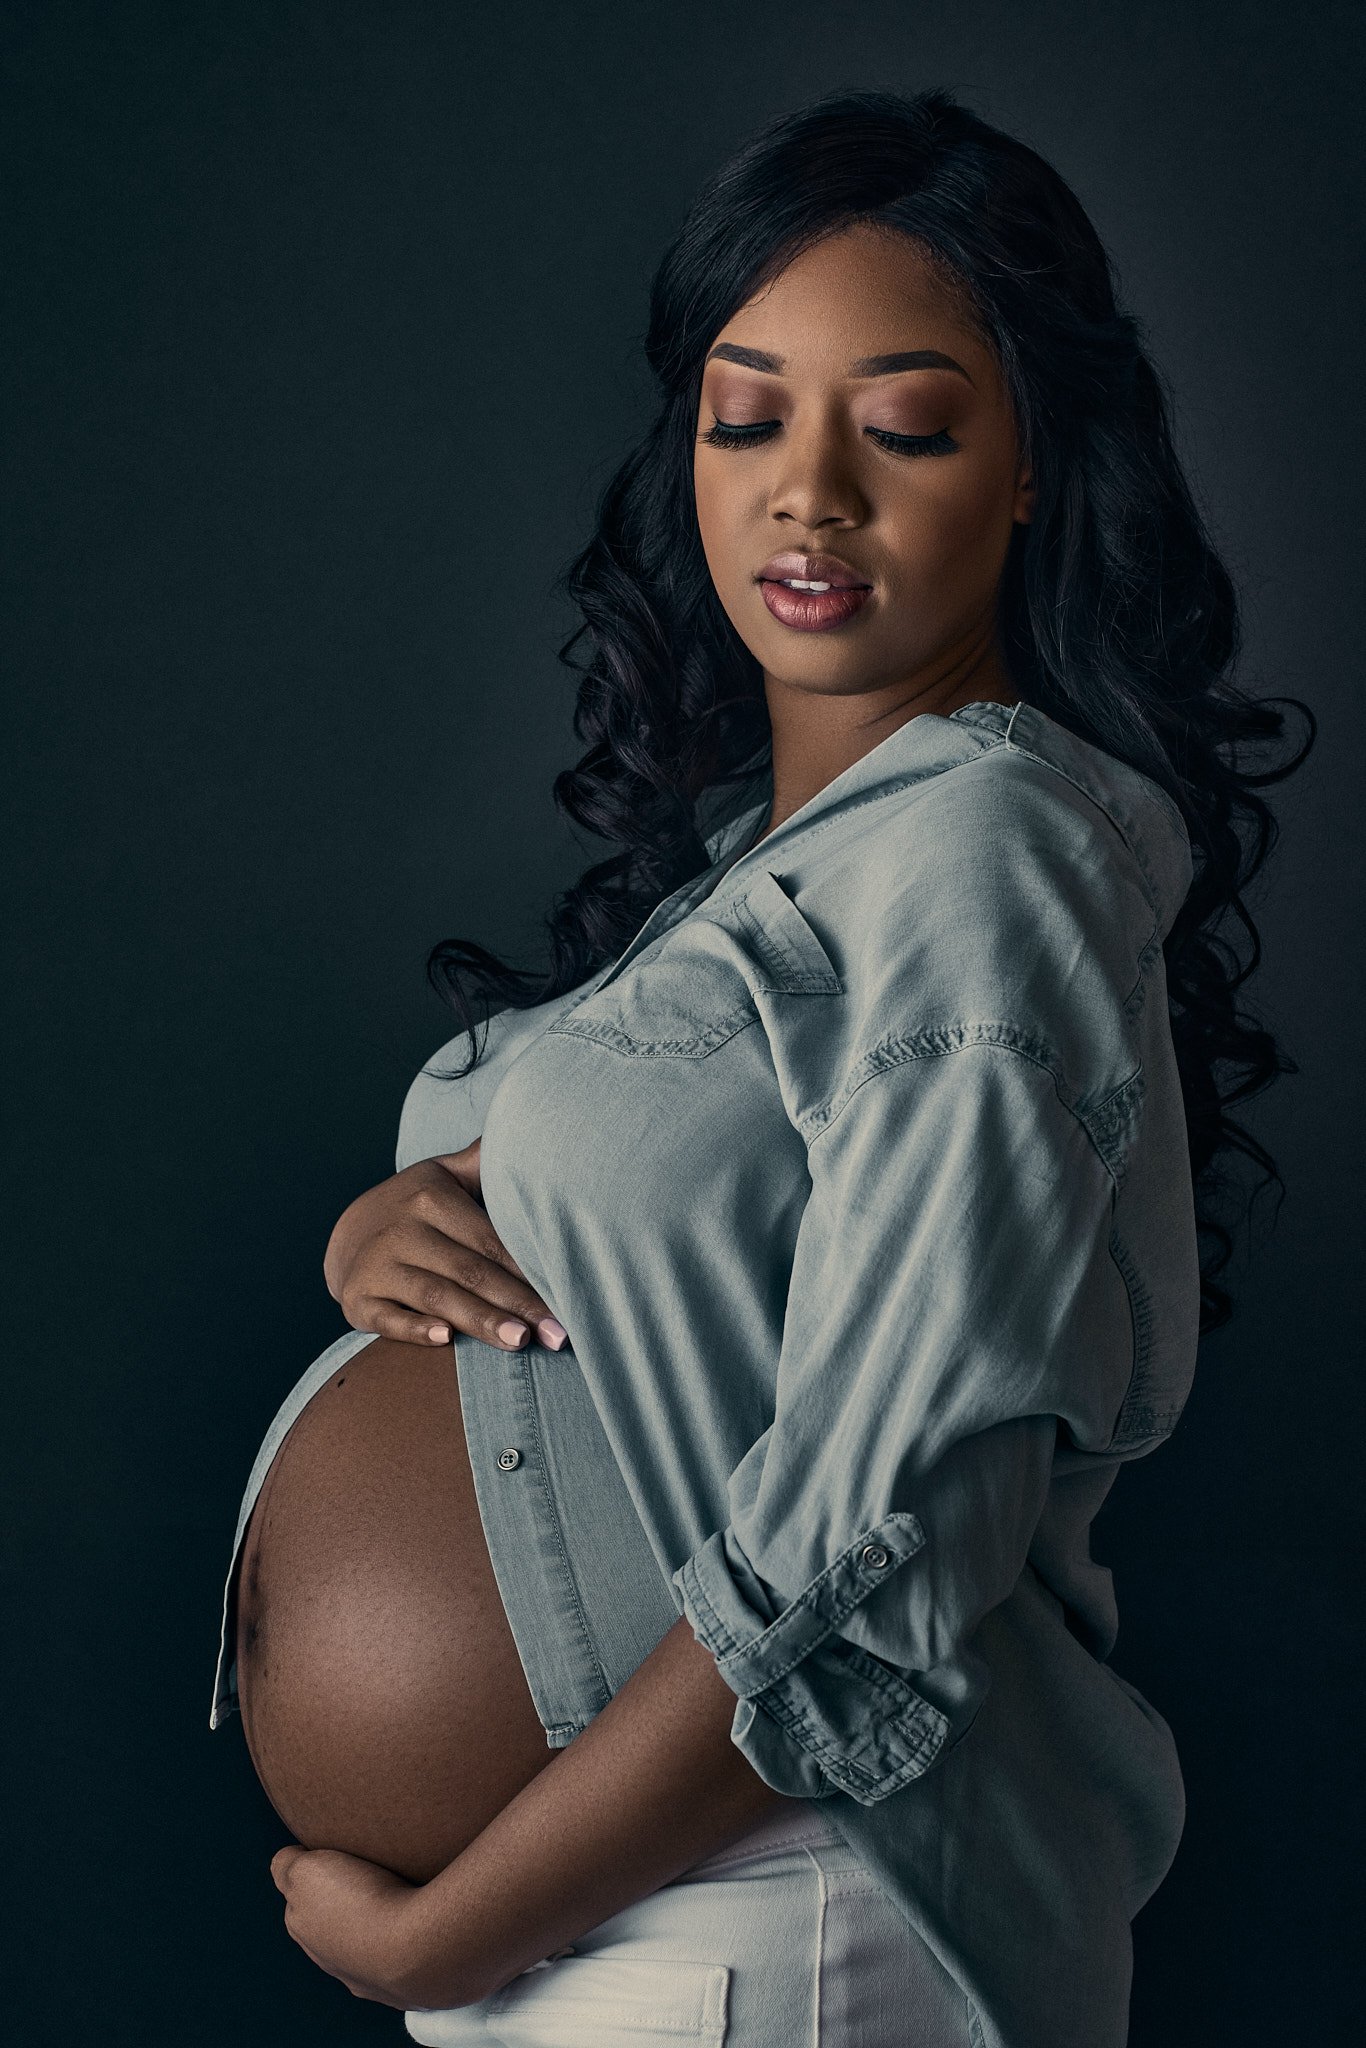 pregnant woman poses in front of a dark background